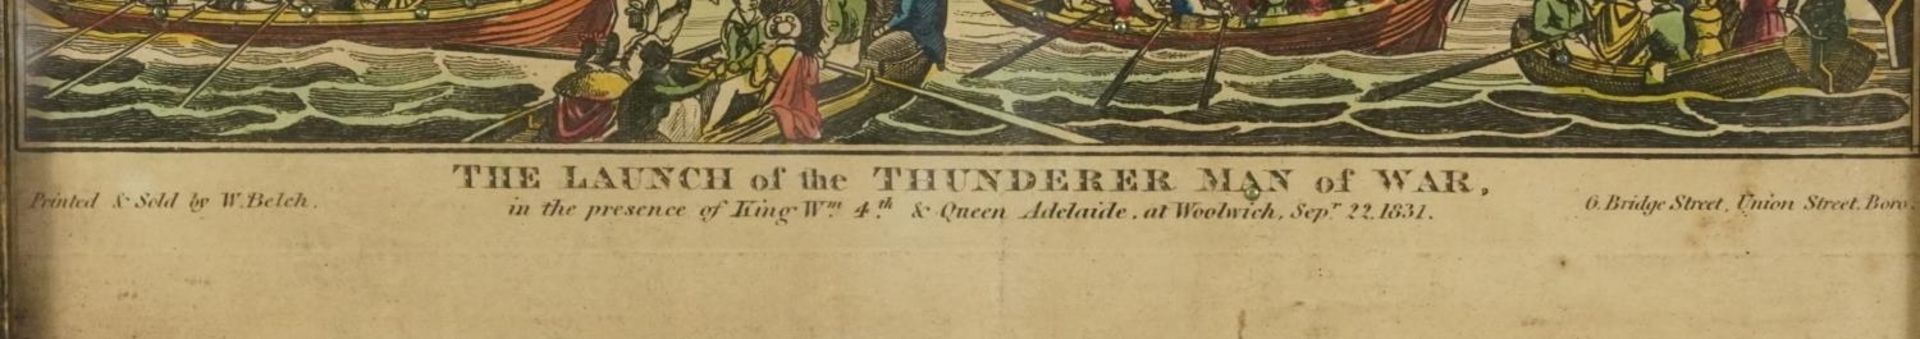 The Launch of the Thunderer Man of War, 19th century embellished engraving in colour, printed by - Image 5 of 8